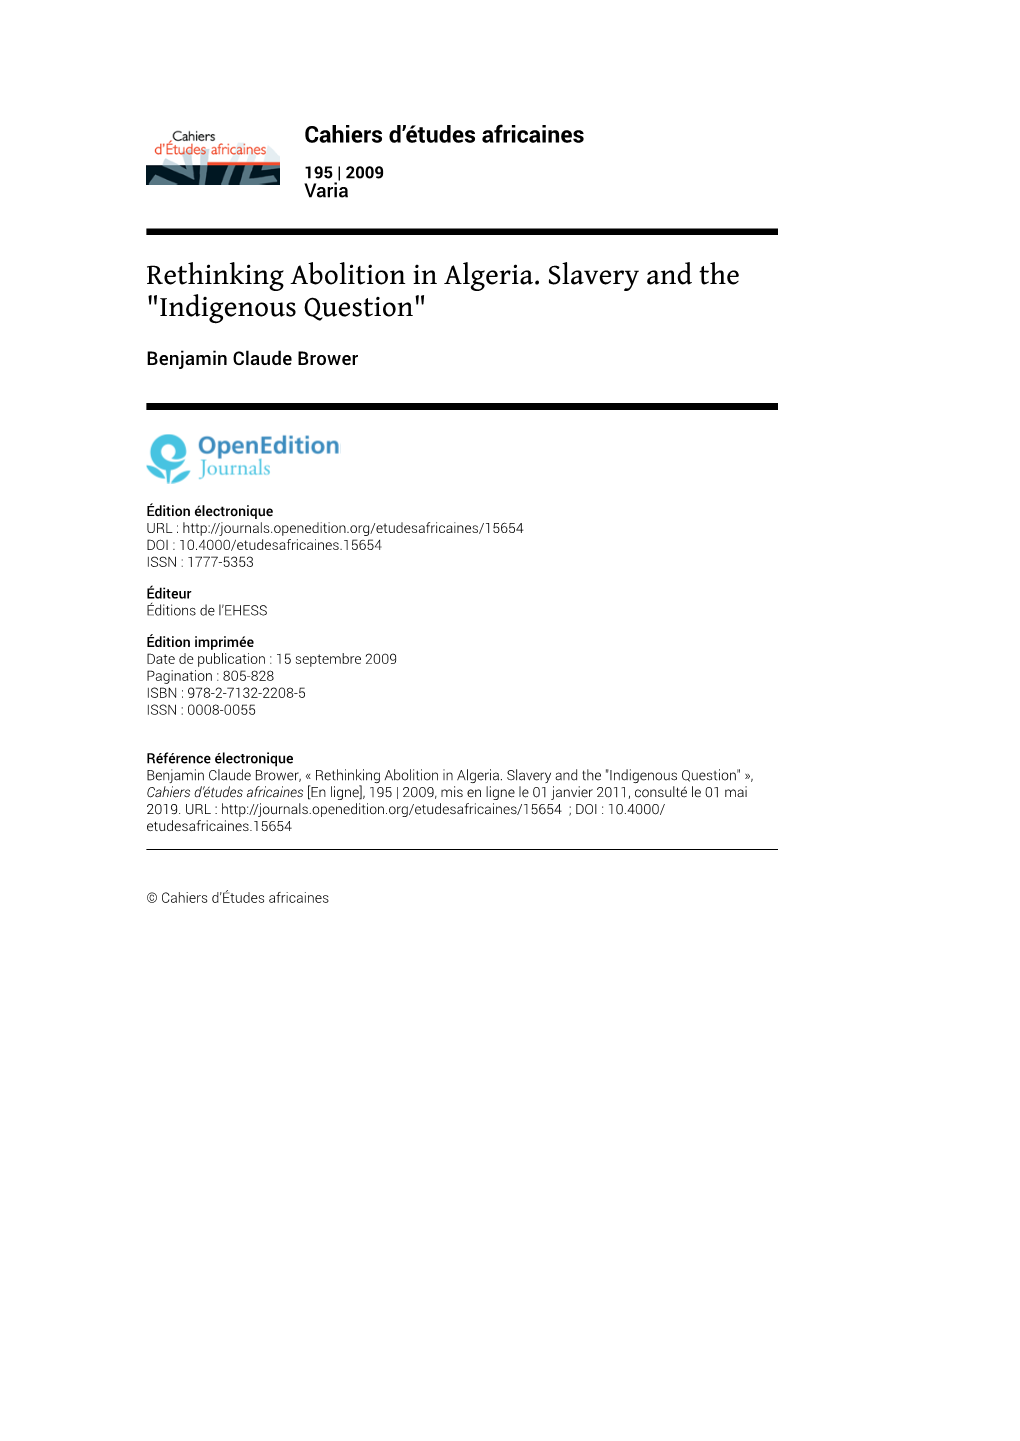 Rethinking Abolition in Algeria. Slavery and the "Indigenous Question"